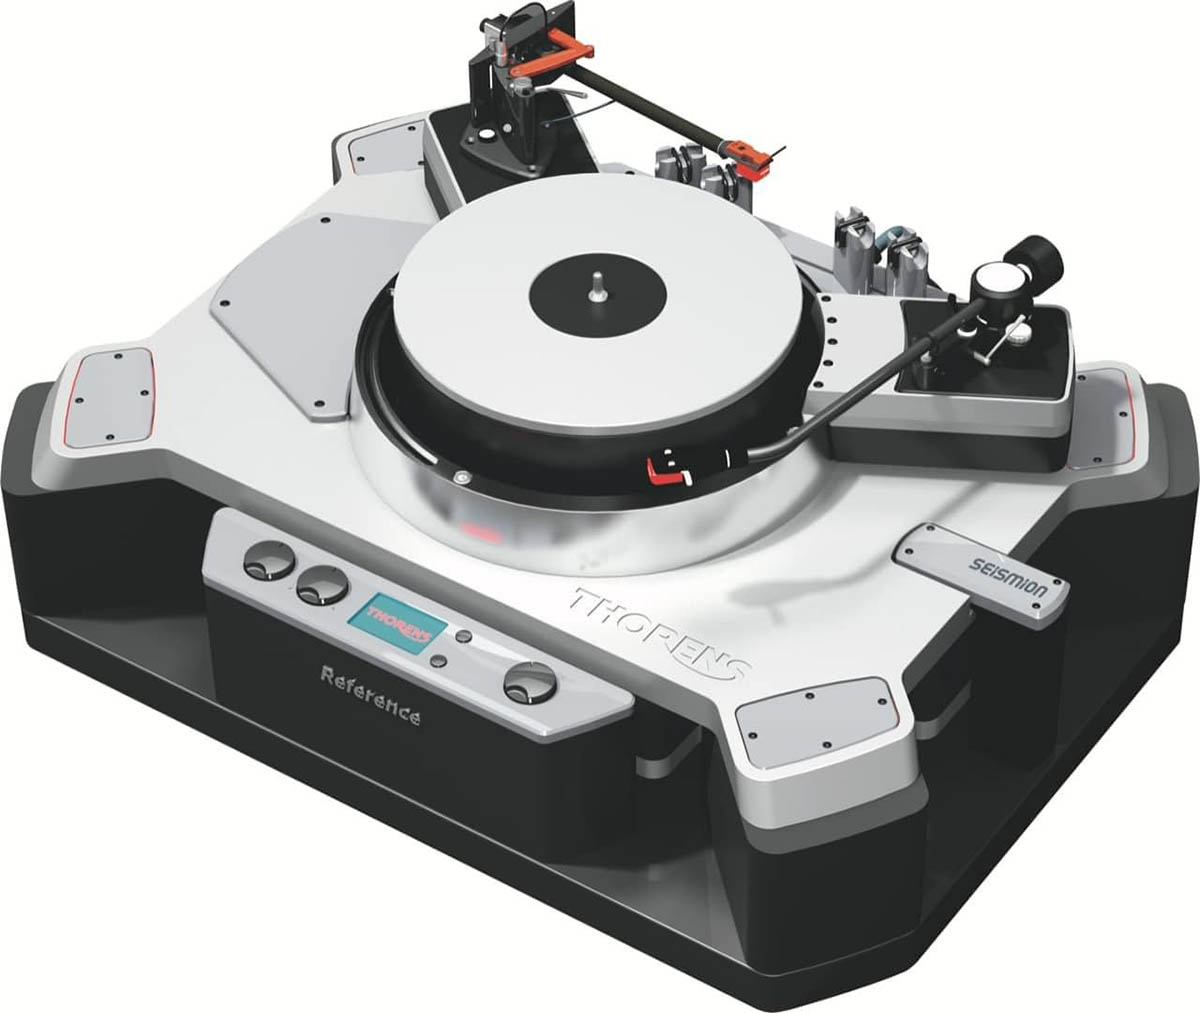 nghenhin_vietnam_chi_tiet_cong_nghe_ky_thuat_mam_than_thorens_new_reference_2023_turntable_h13.jpg (111 KB)